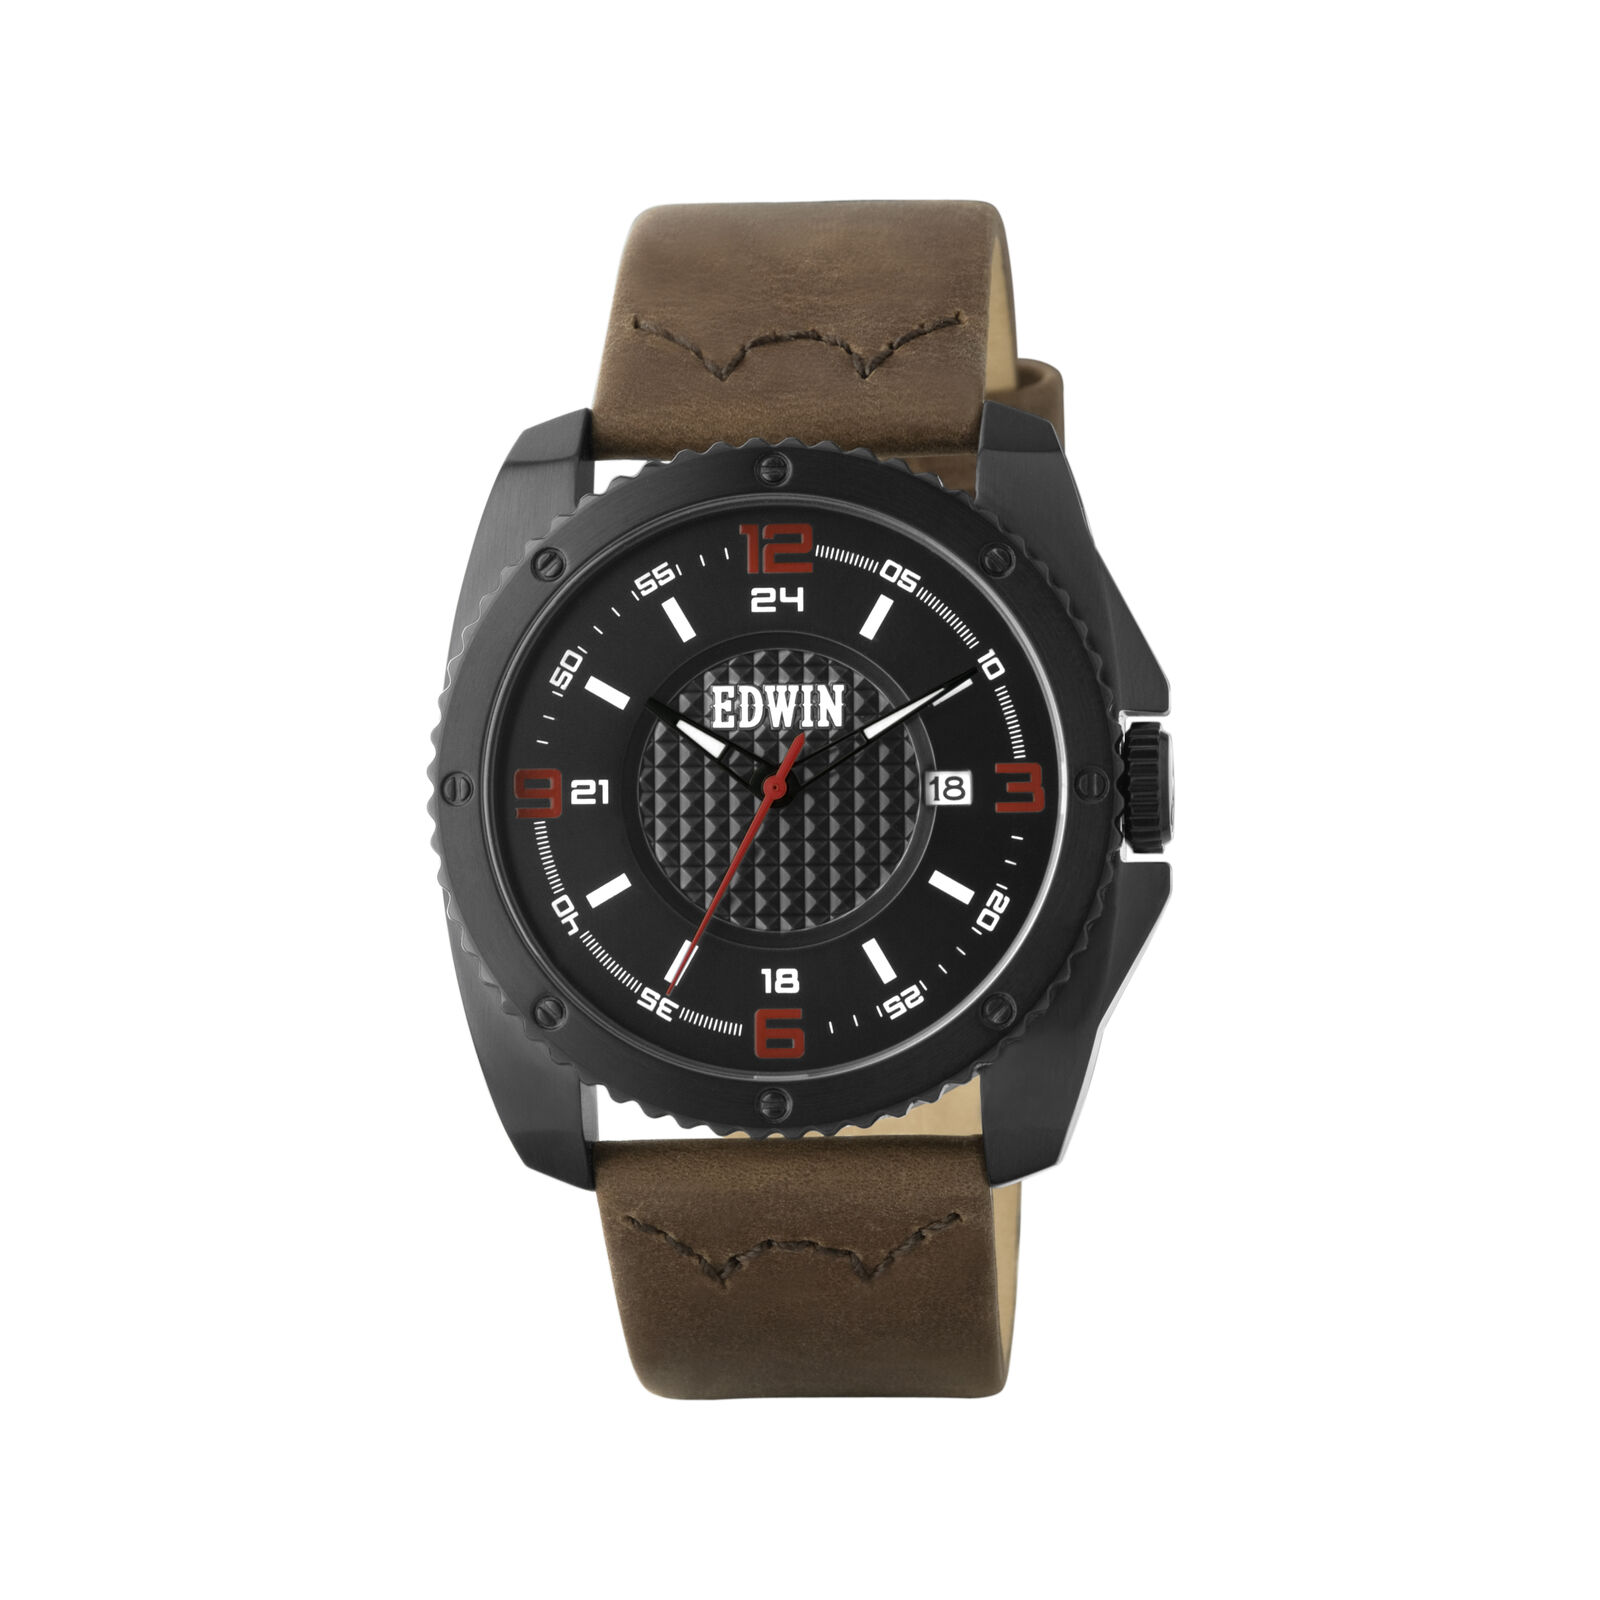 Edwin EMERGE Men's 3 Hand-Date Watch, Black Stainless Steel Case, Brown Leather